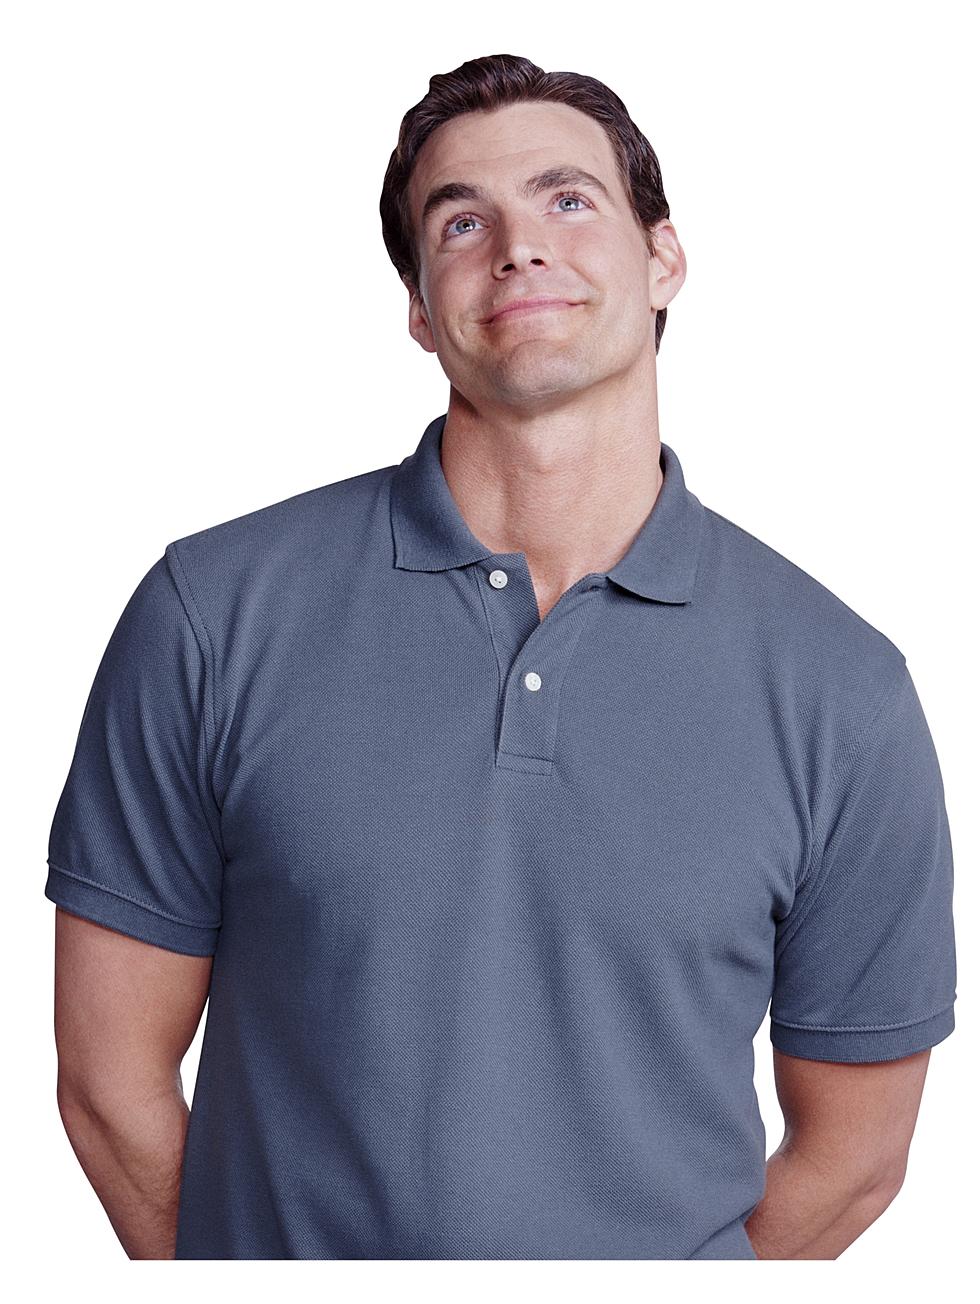 Polo Shirts Are Out of Fashion, Gurus Say [POLL]